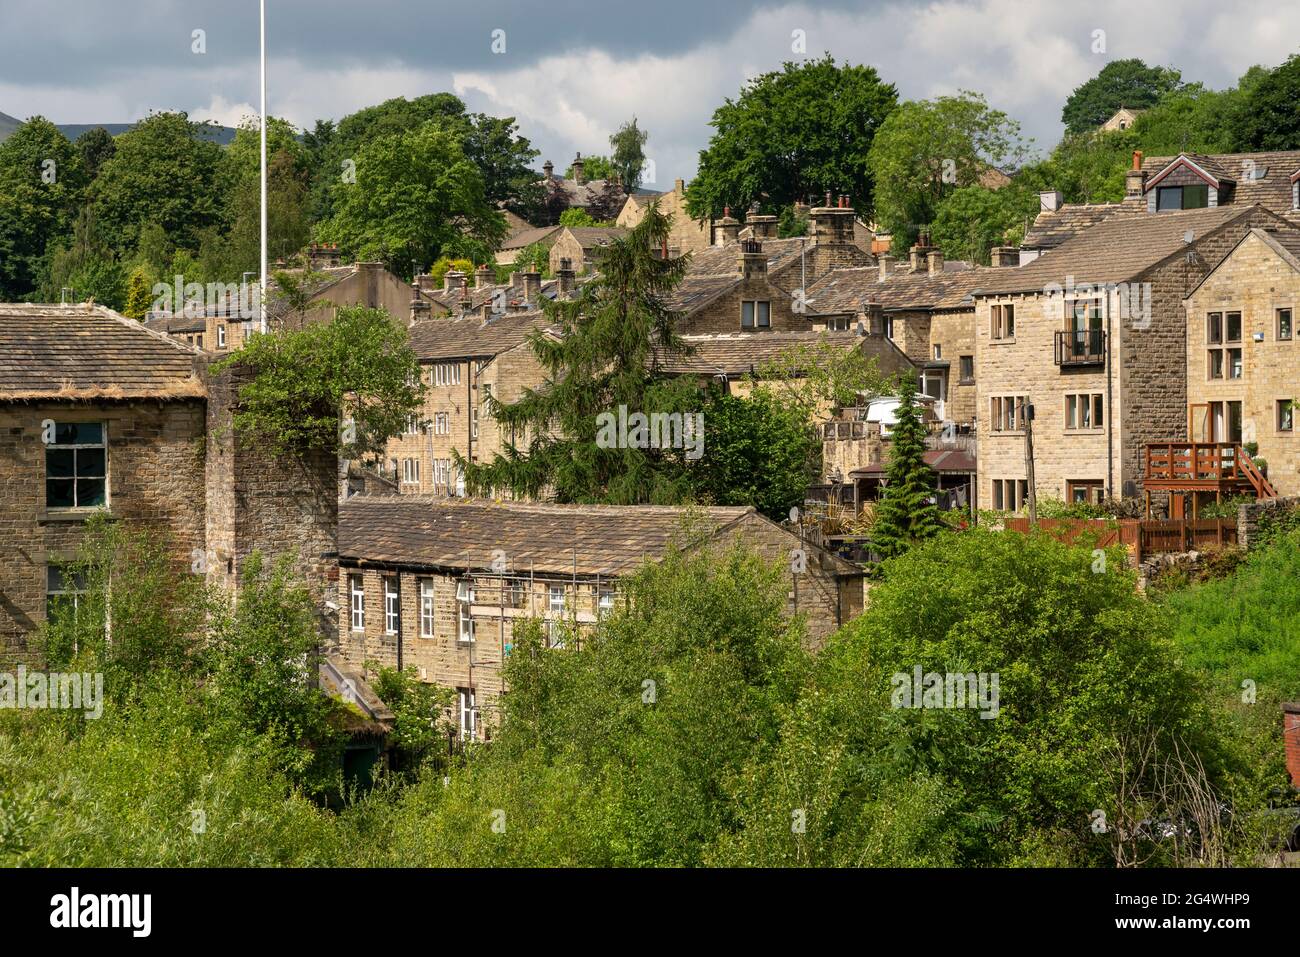 Hinchliffe Mill near Homlfirth, West Yorkshire, England. A village used in filming tv comedy 'Last of the Summer Wine' Stock Photo